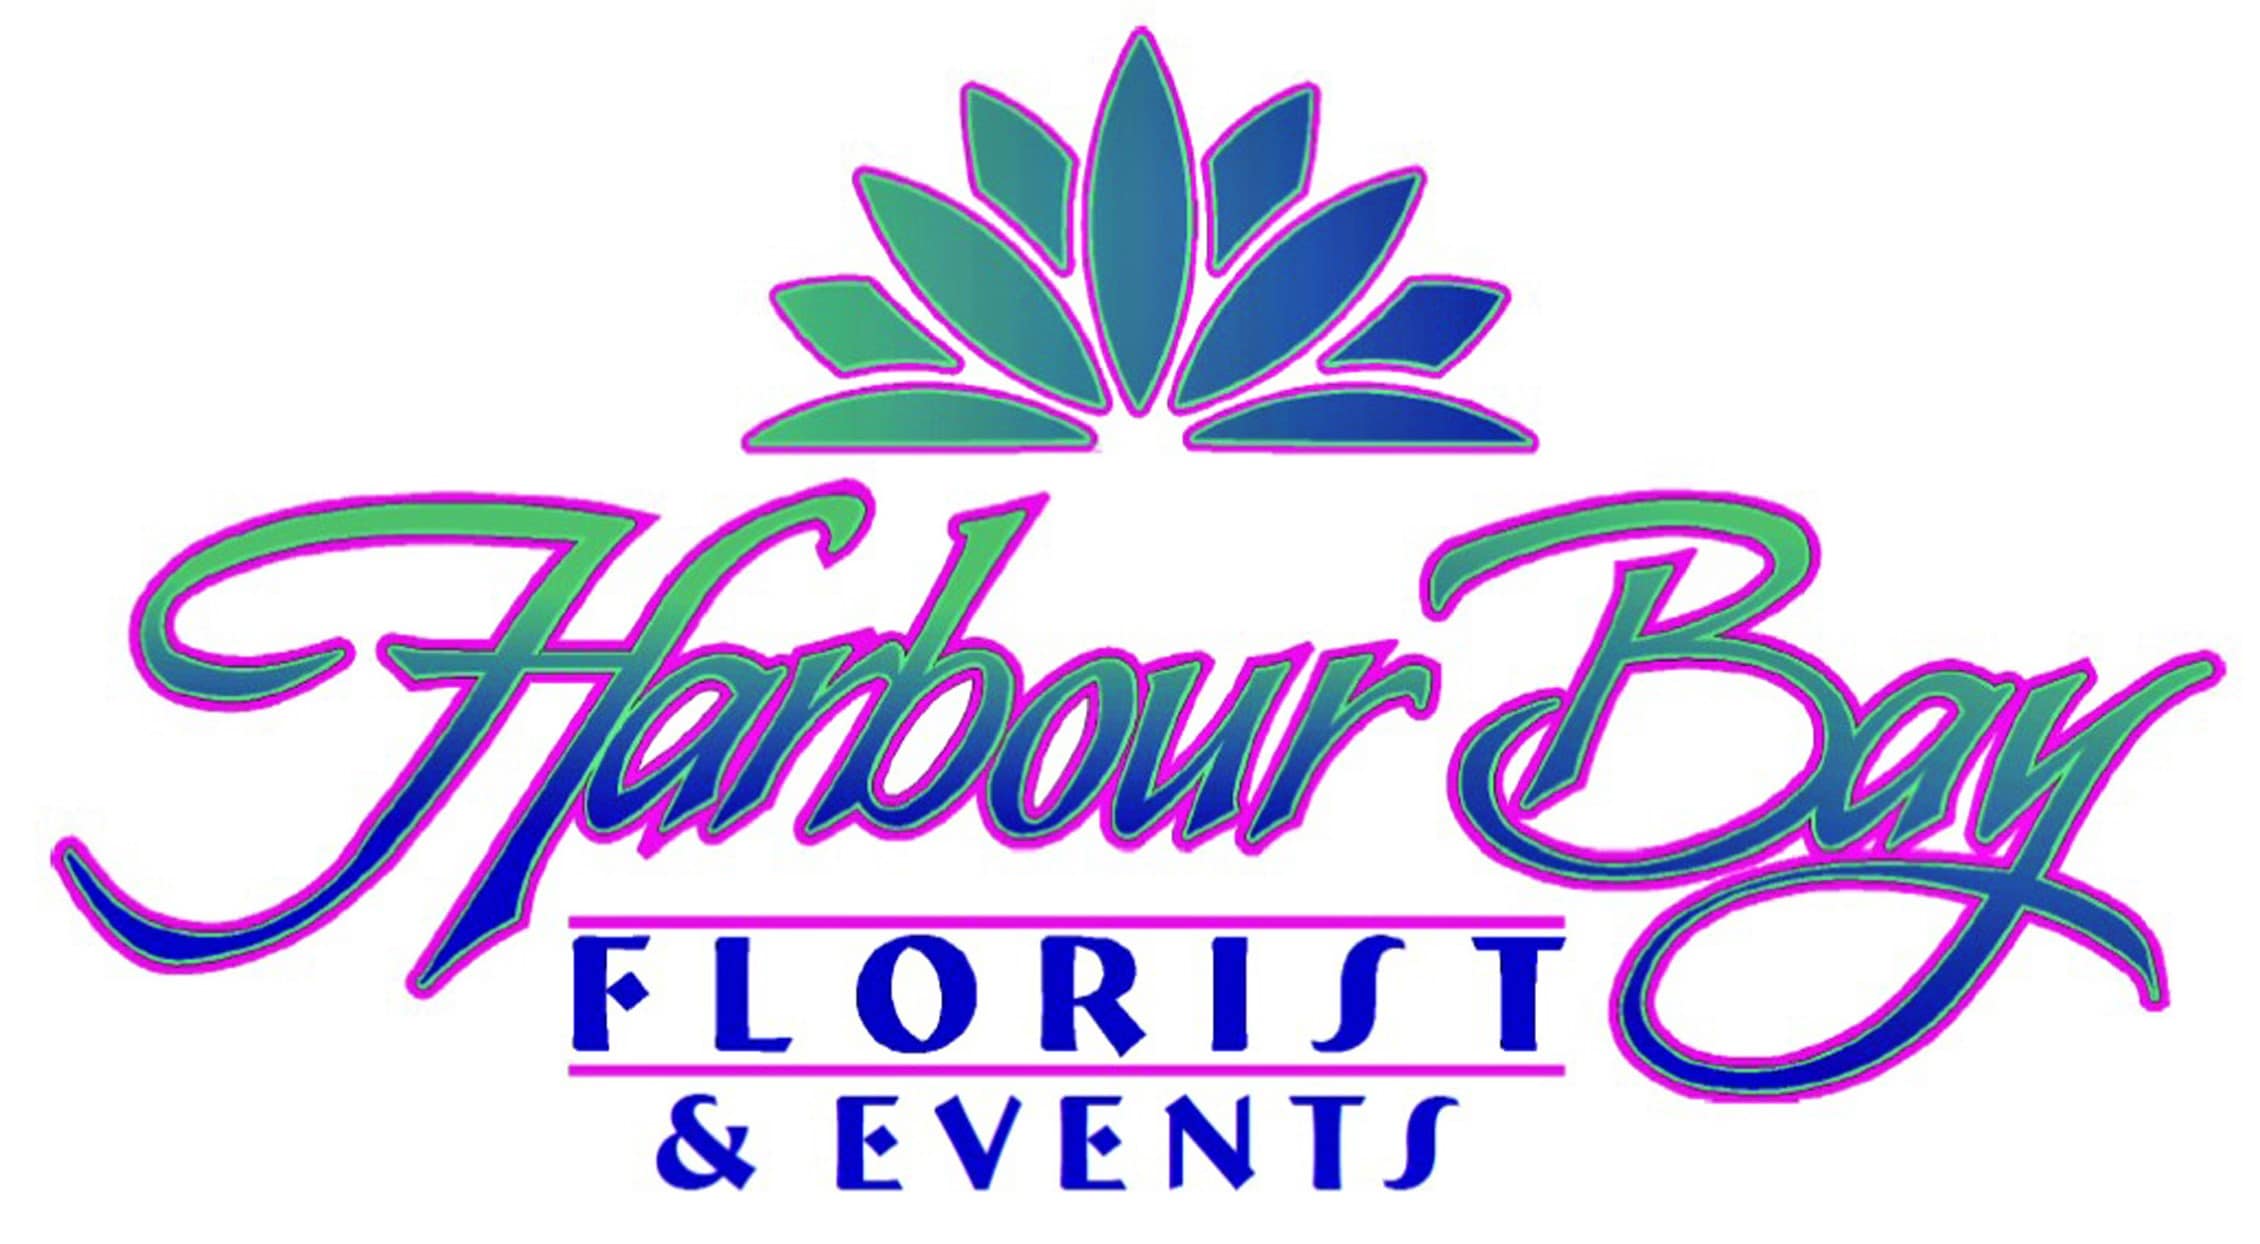 Harbour Bay Florist and Events